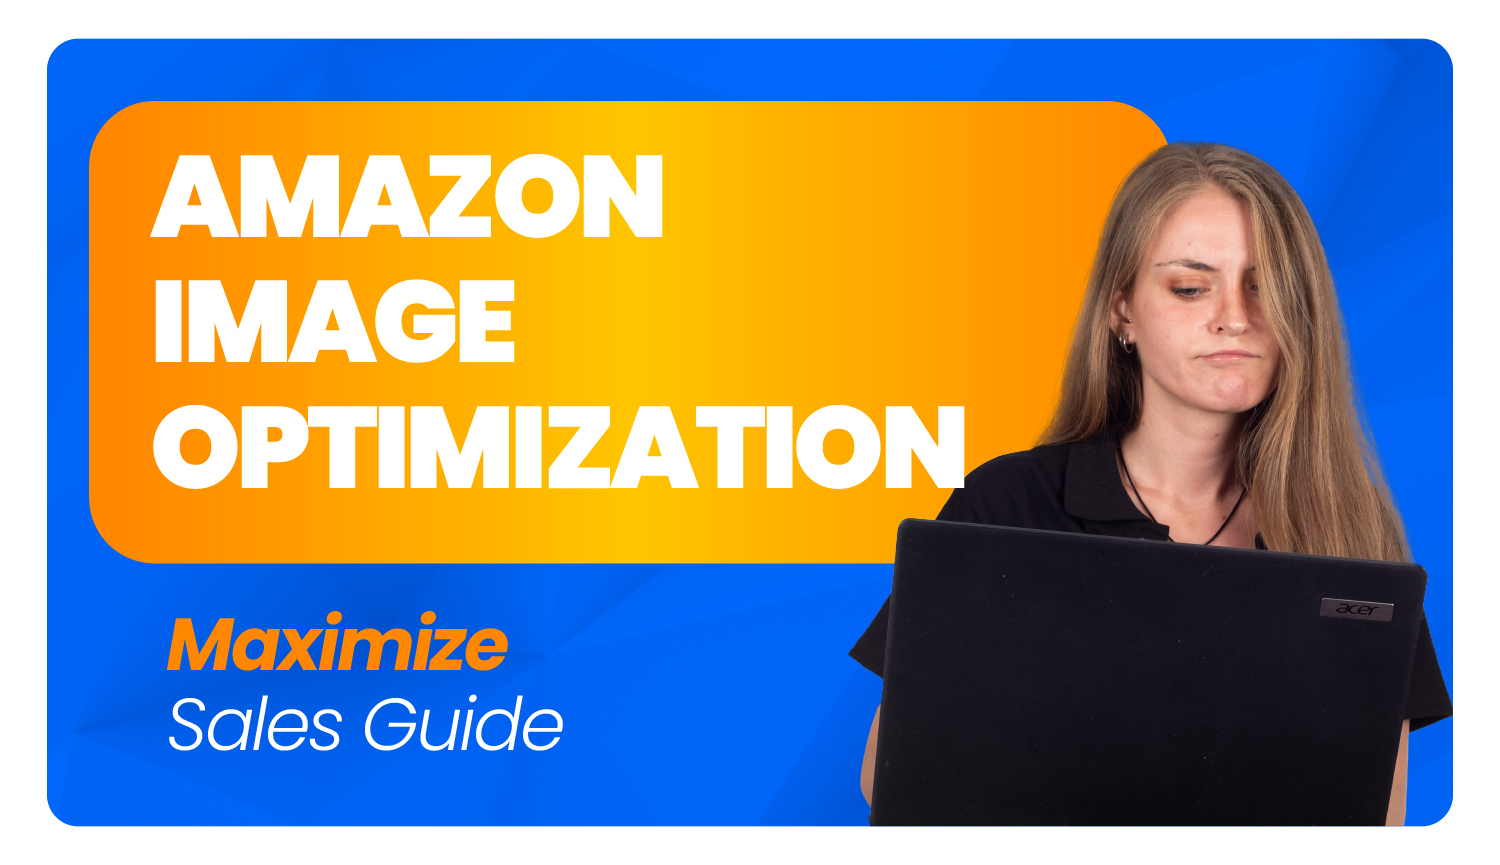 Amazon Product Image Optimization for Search & Conversion